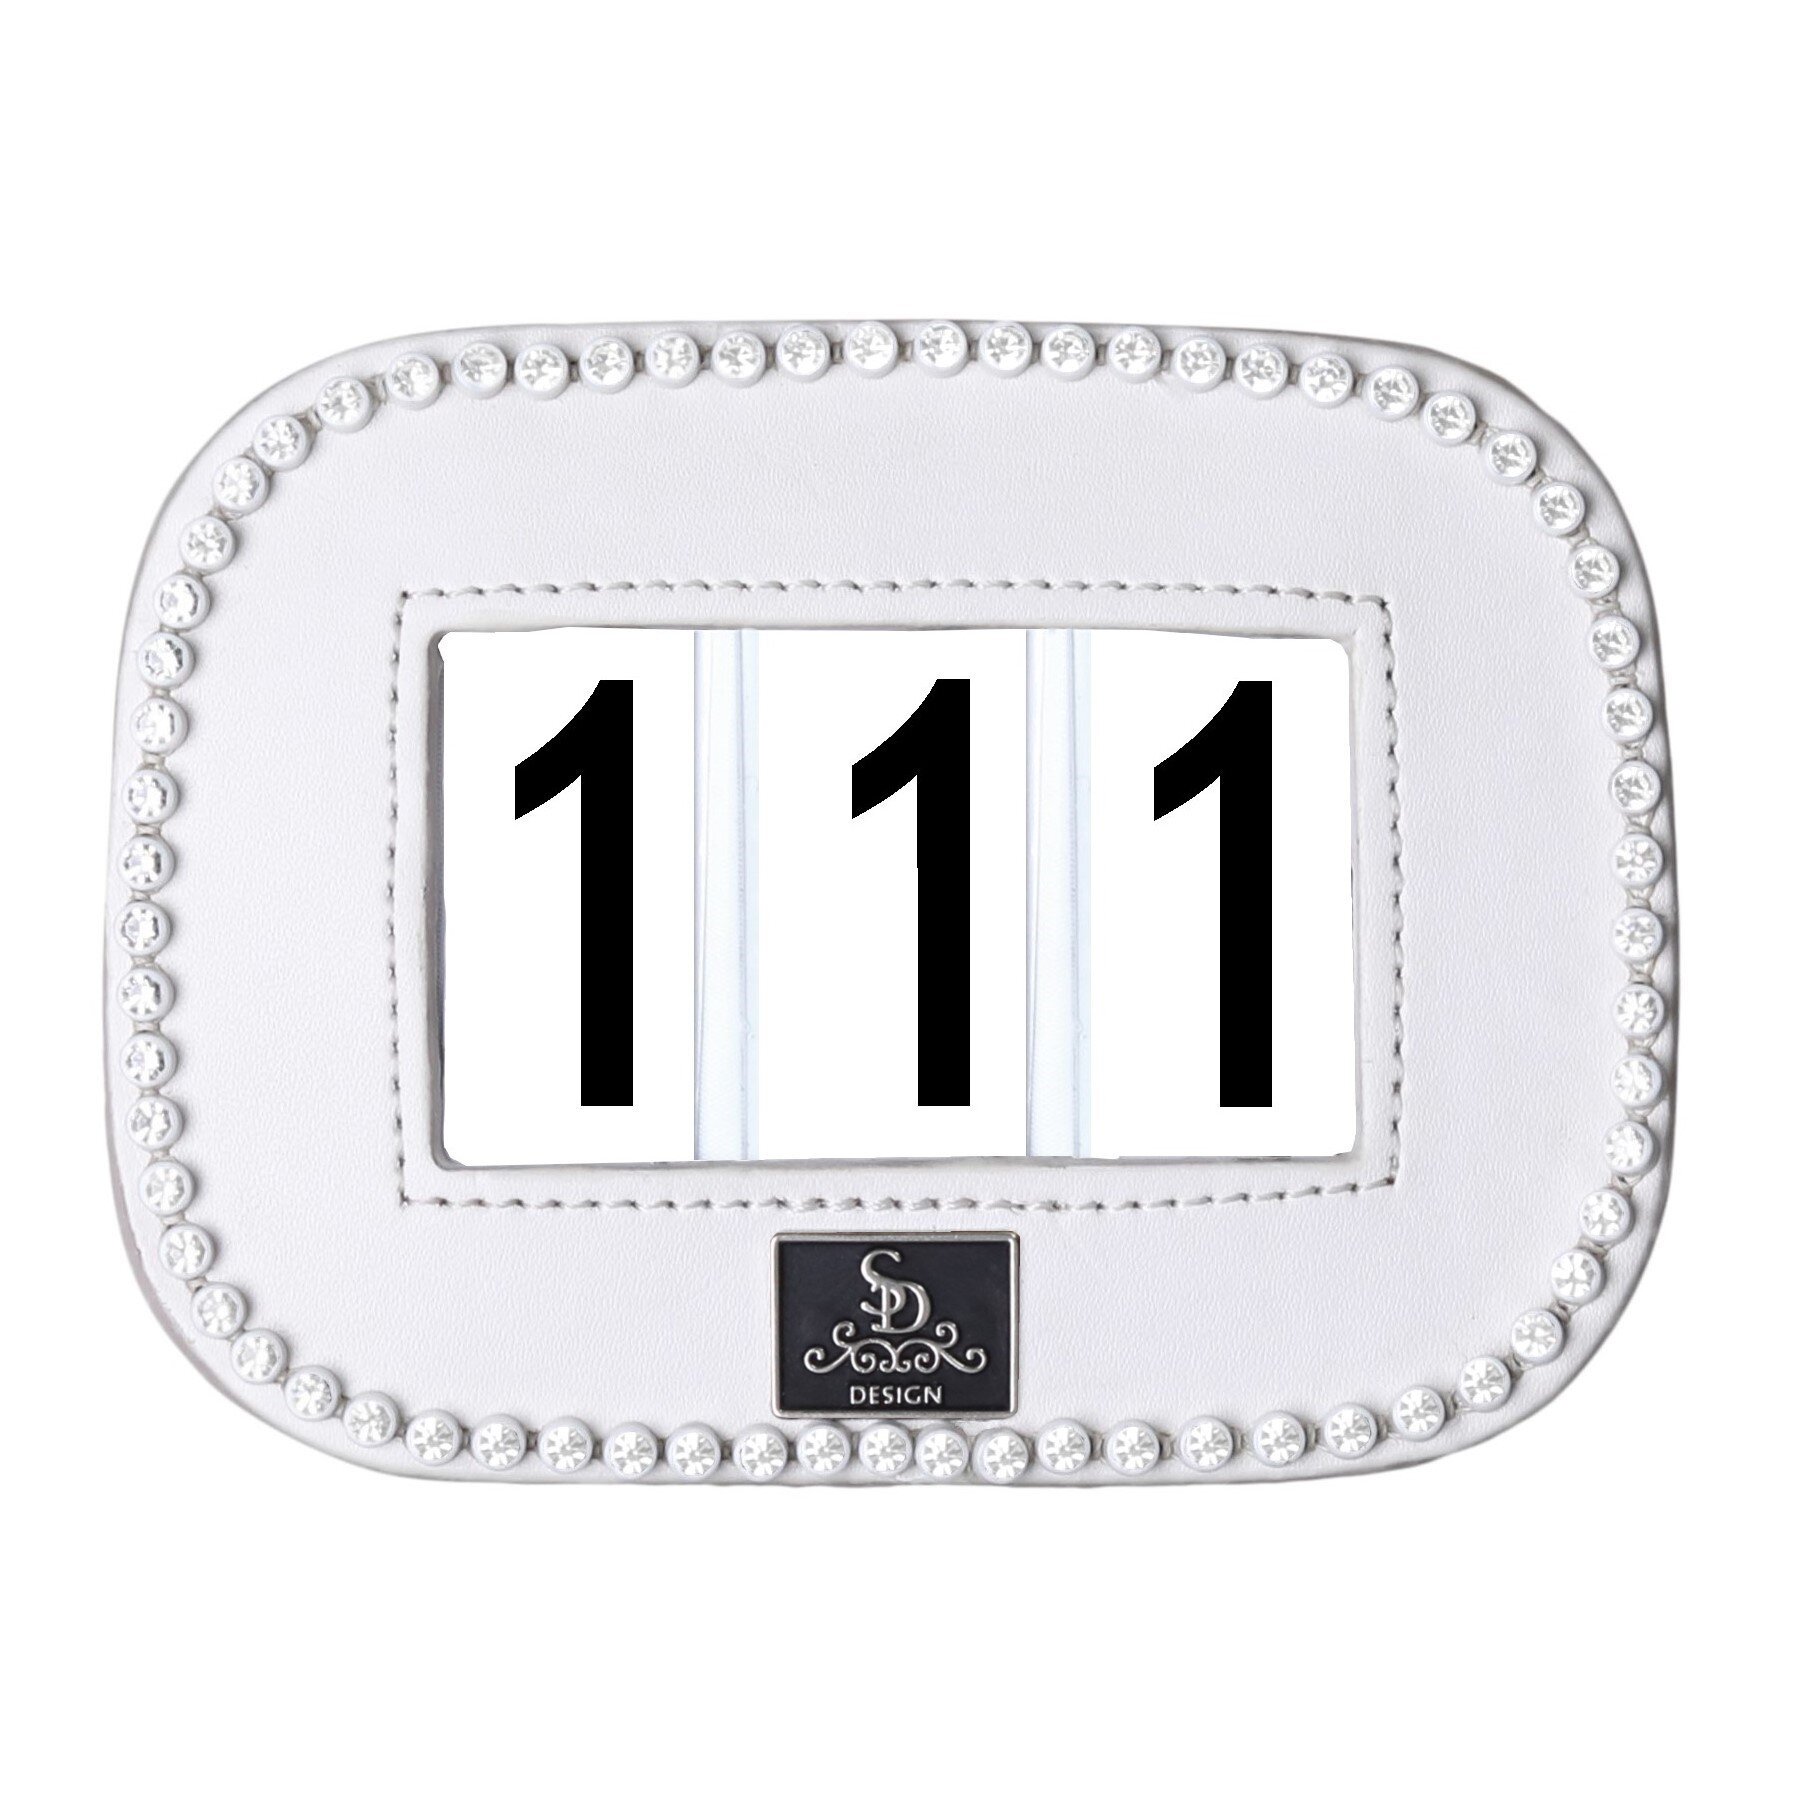 Number holder with crystals - White